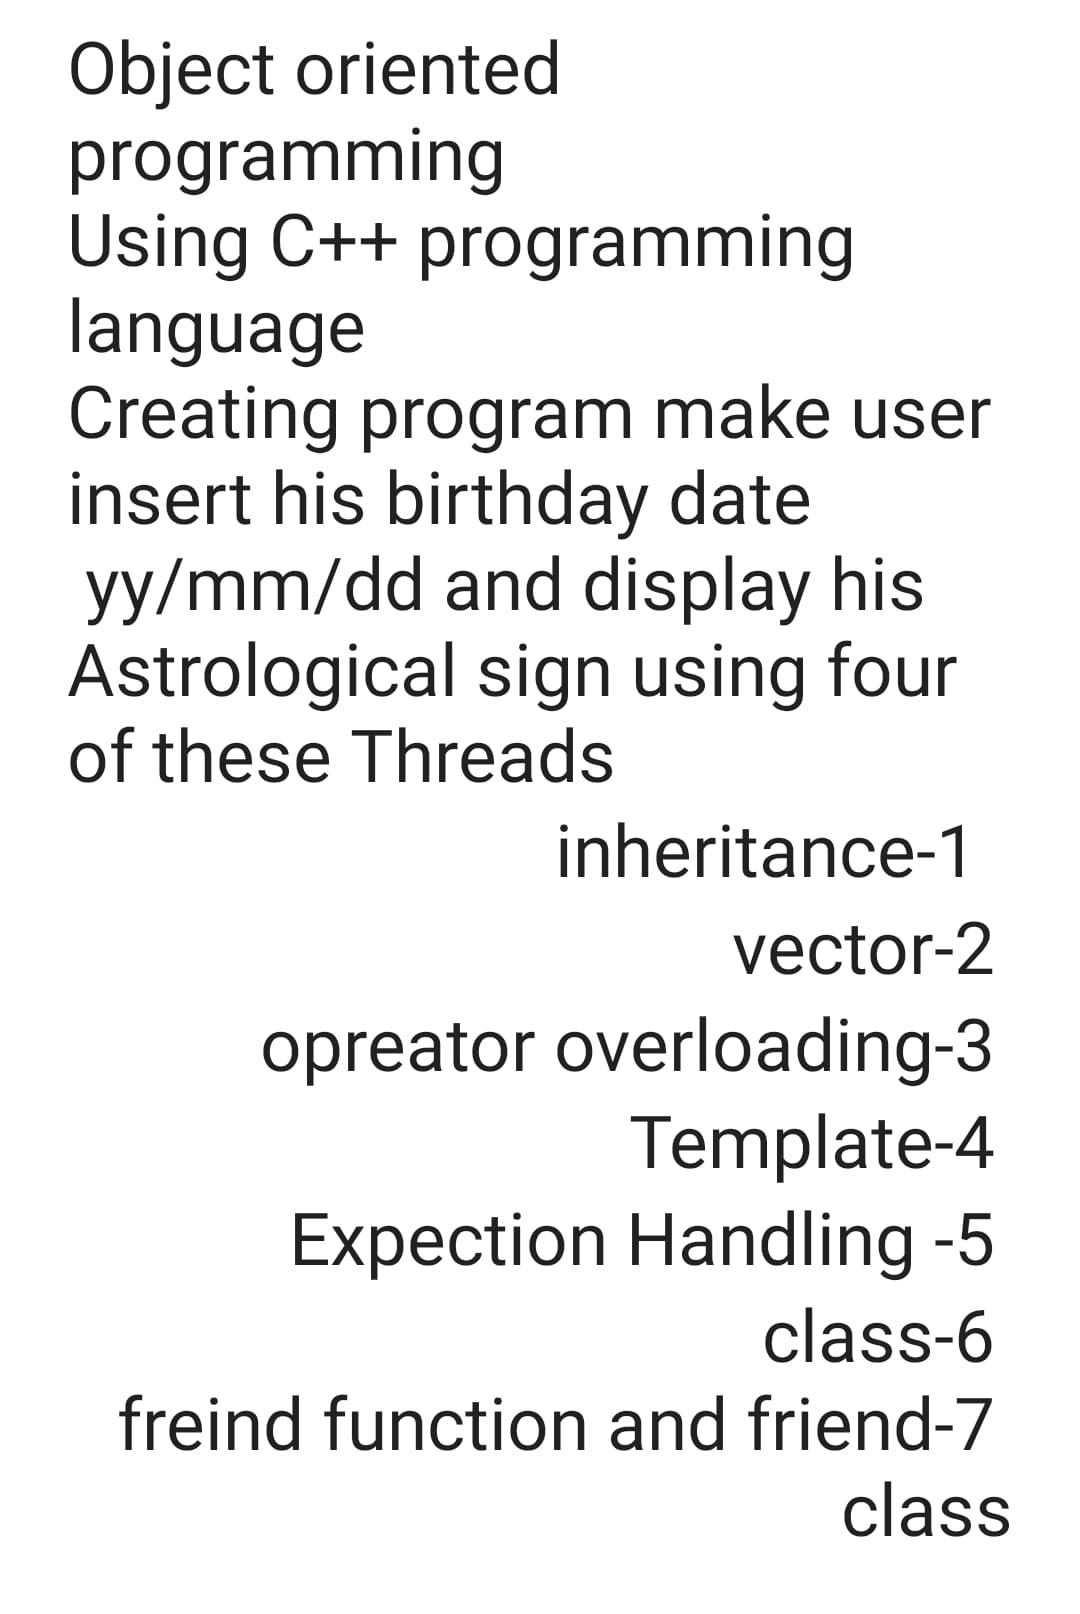 Object oriented
programming
Using C++ programming
language
Creating program make user
insert his birthday date
yy/mm/dd and display his
Astrological sign using four
of these Threads
inheritance-1
vector-2
opreator overloading-3
Template-4
Expection Handling -5
class-6
freind function and friend-7
class
